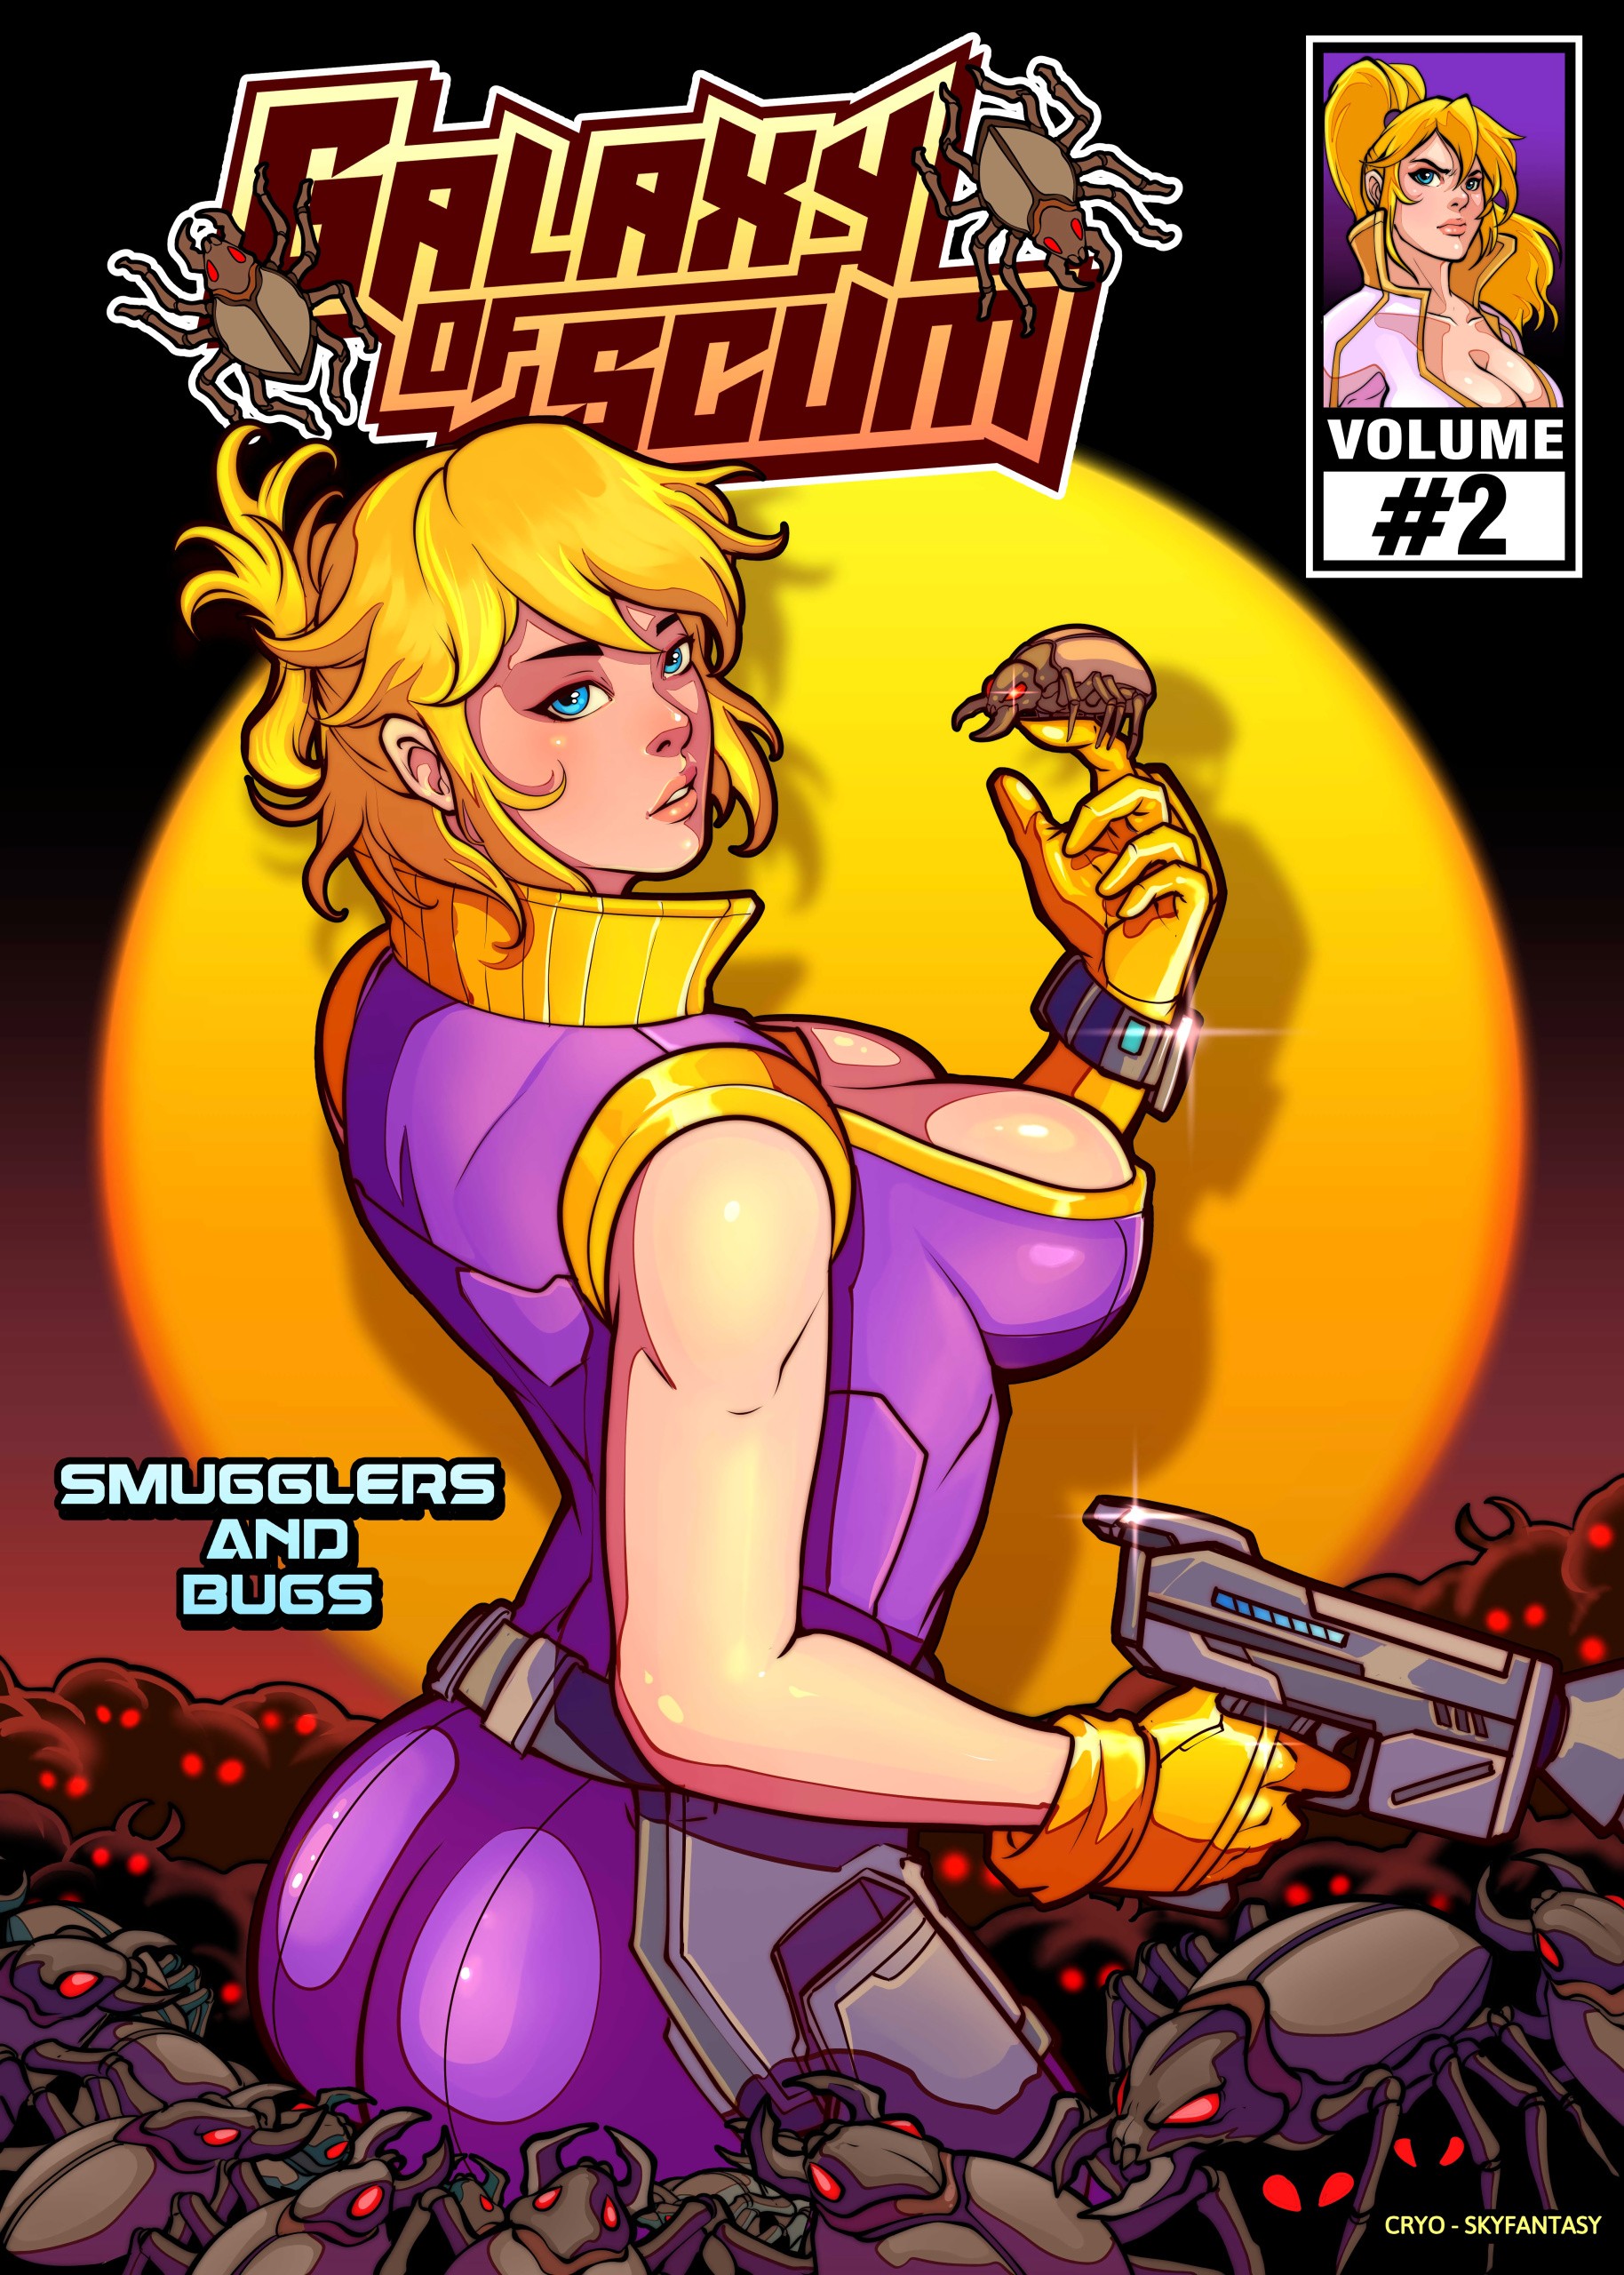 Galaxy of Scum Issue 2: Smuggler's and Bugs porn comic picture 1